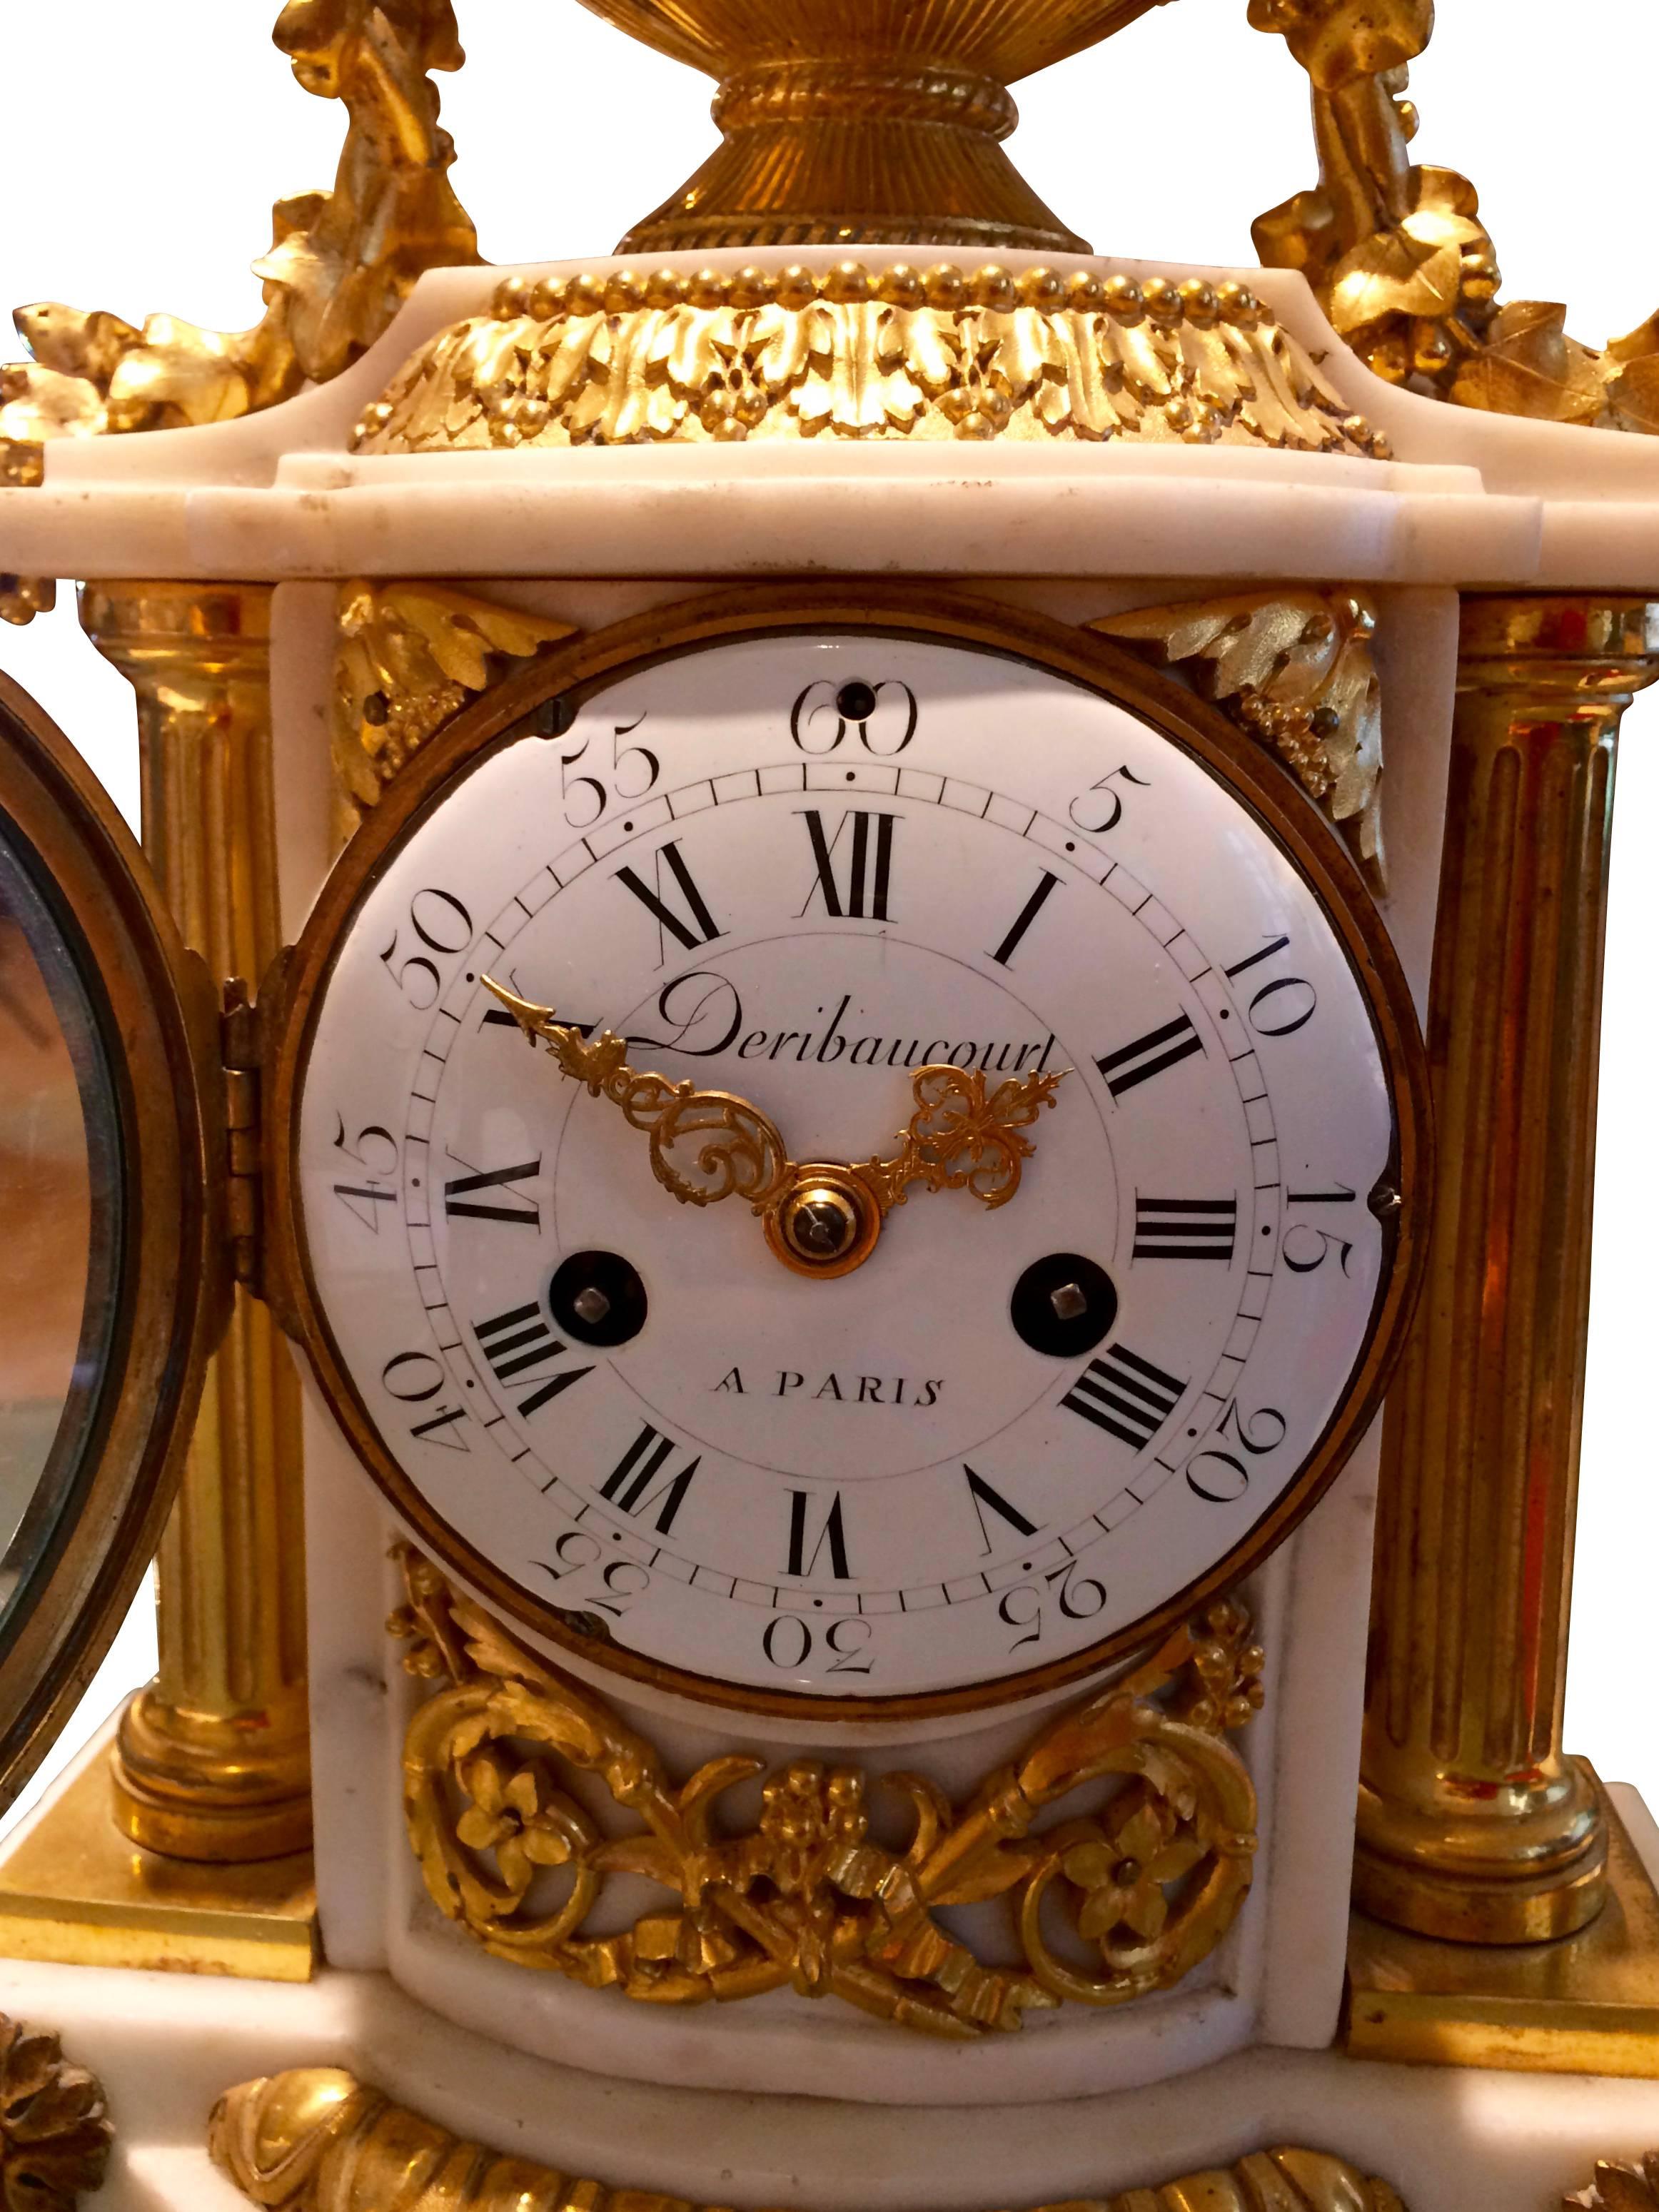 French chimney clock, circa 1780, Carrara marble with gilded bronze applications. Signed in the dial 